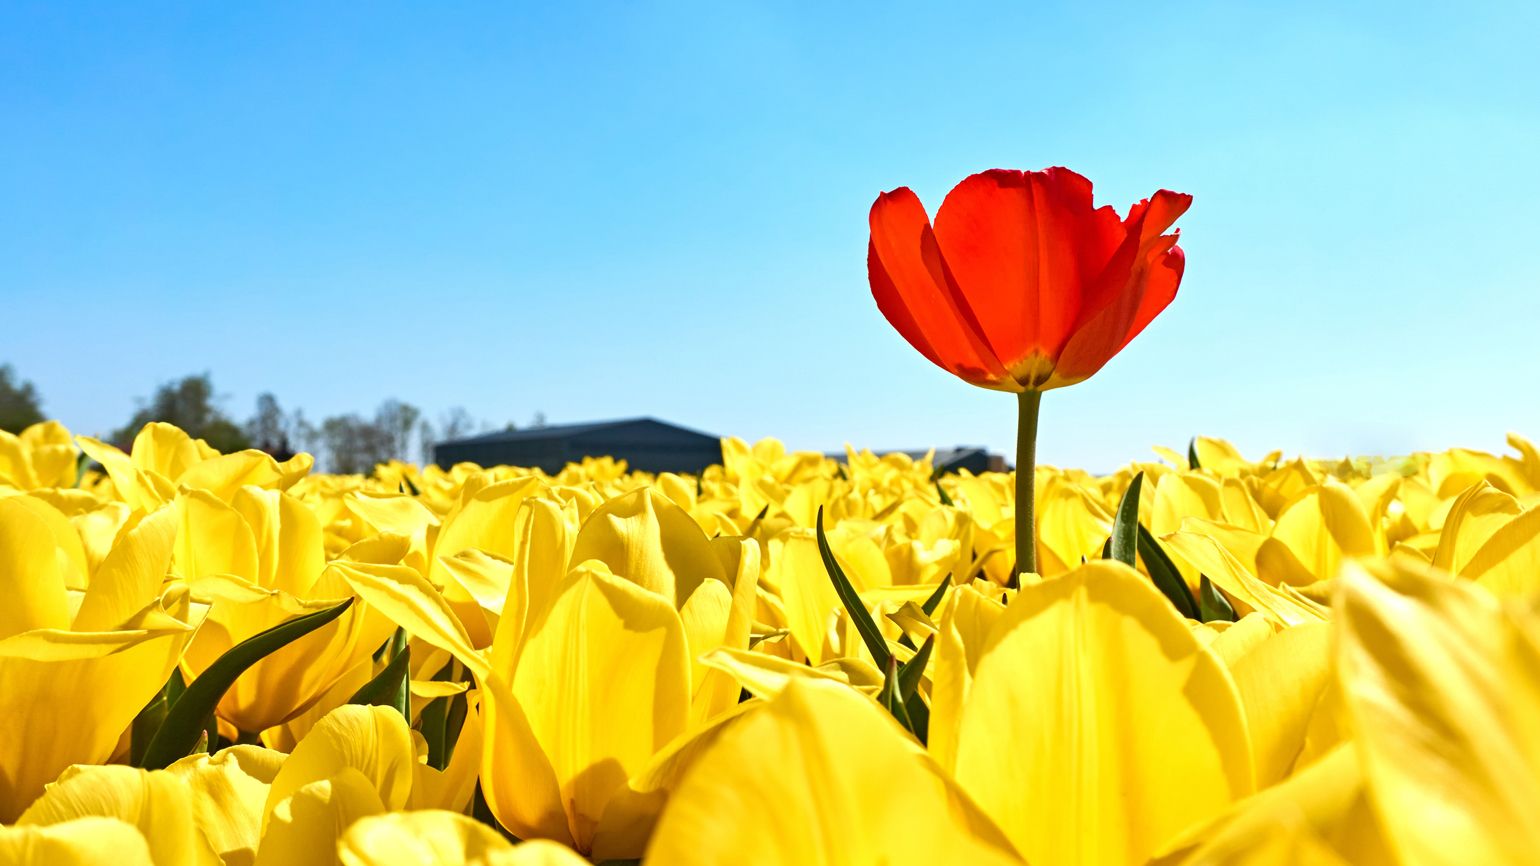 A single red tulip in a field of yellow tulips.